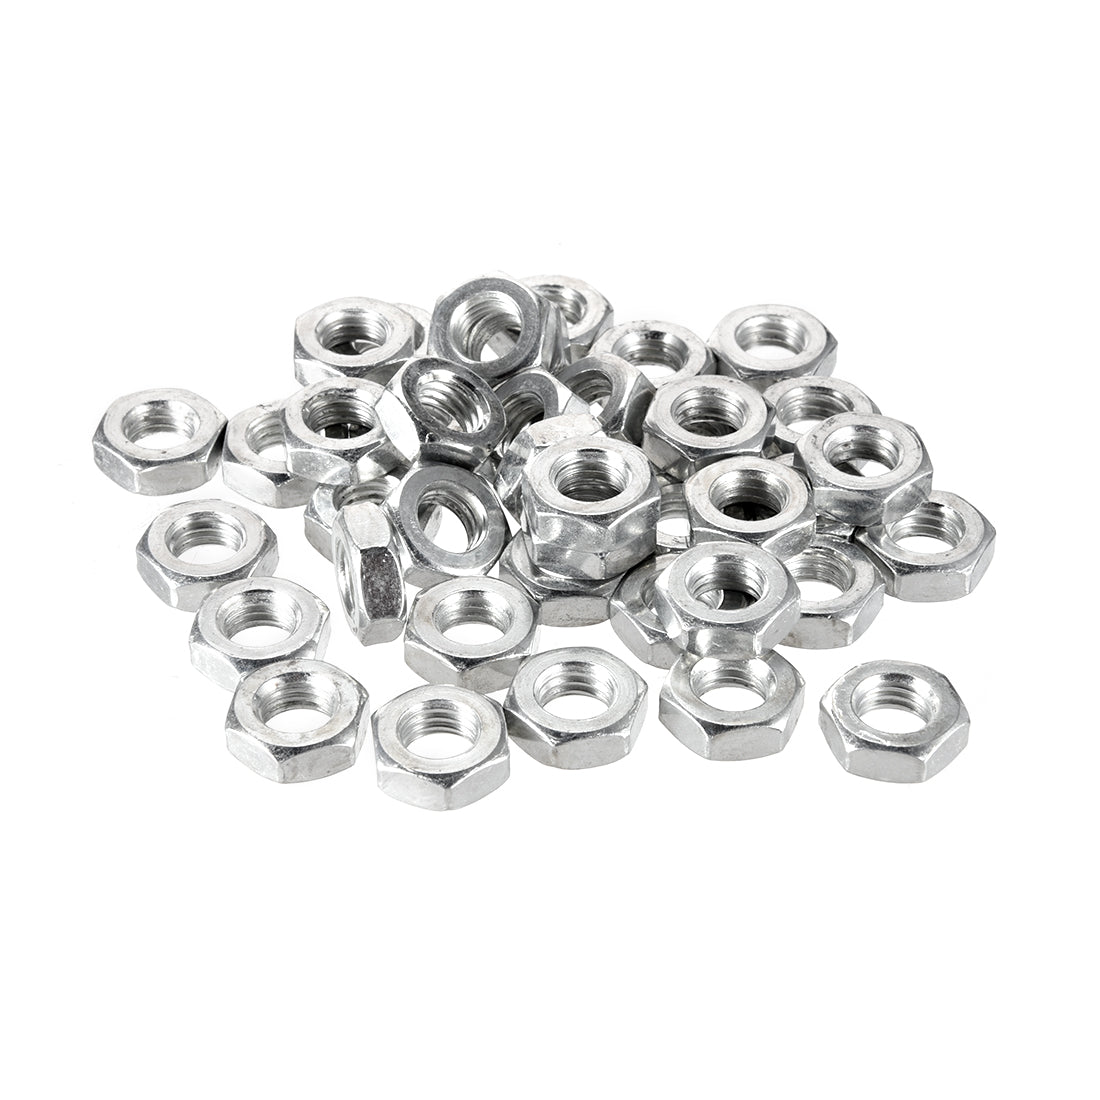 Uxcell Uxcell M8 Metric Carbon Steel Hexagon Hex Nut Silver Tone 40pcs